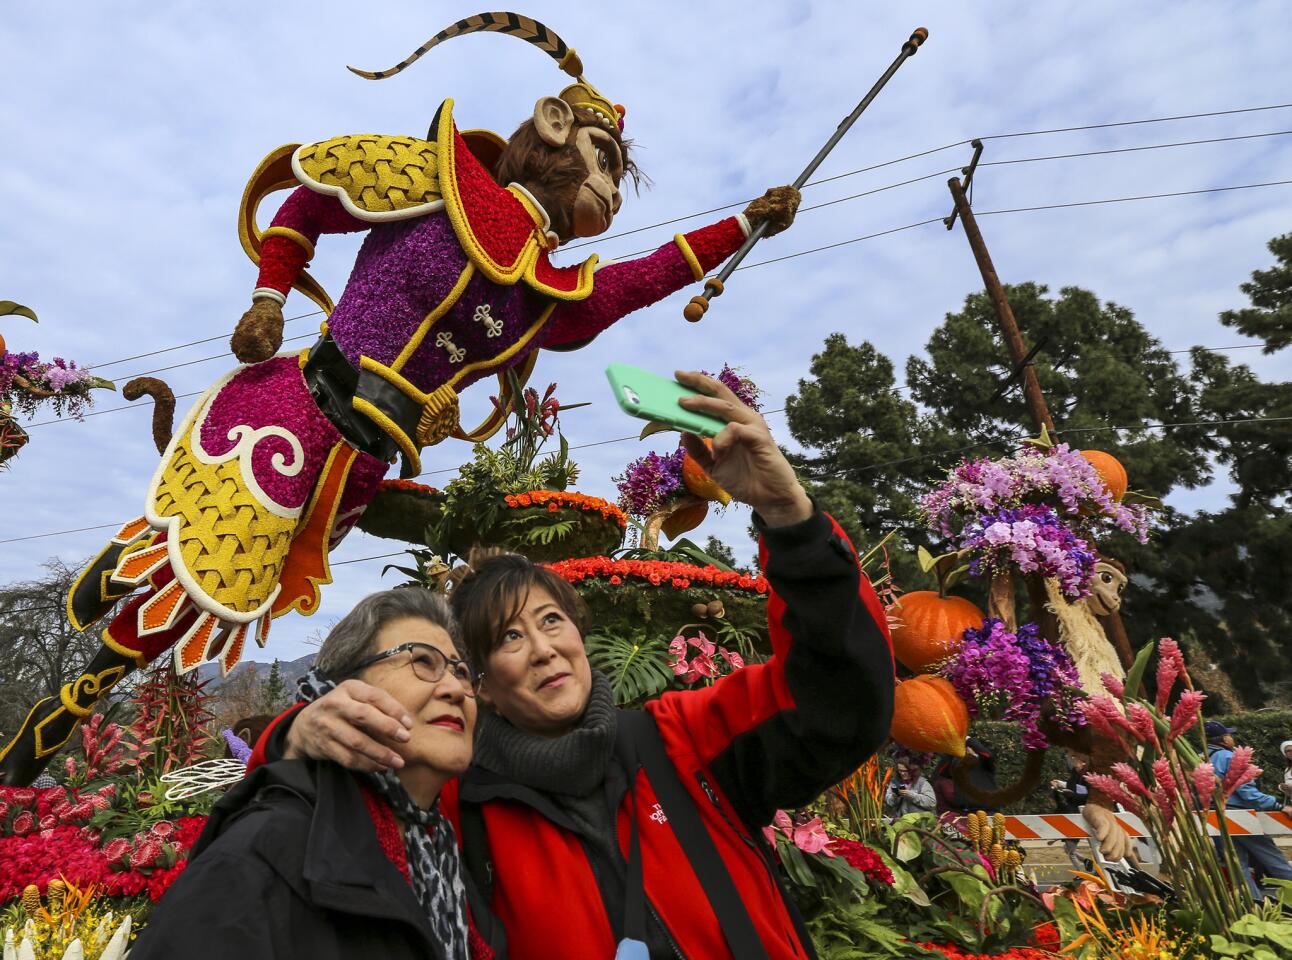 Natalie Nakatani, right, takes a selfie with her mother, Fujiko Nakatani, at the Showcase of Floats, where visitors were able to get an up-close view of Rose Parade floats Tuesday morning.